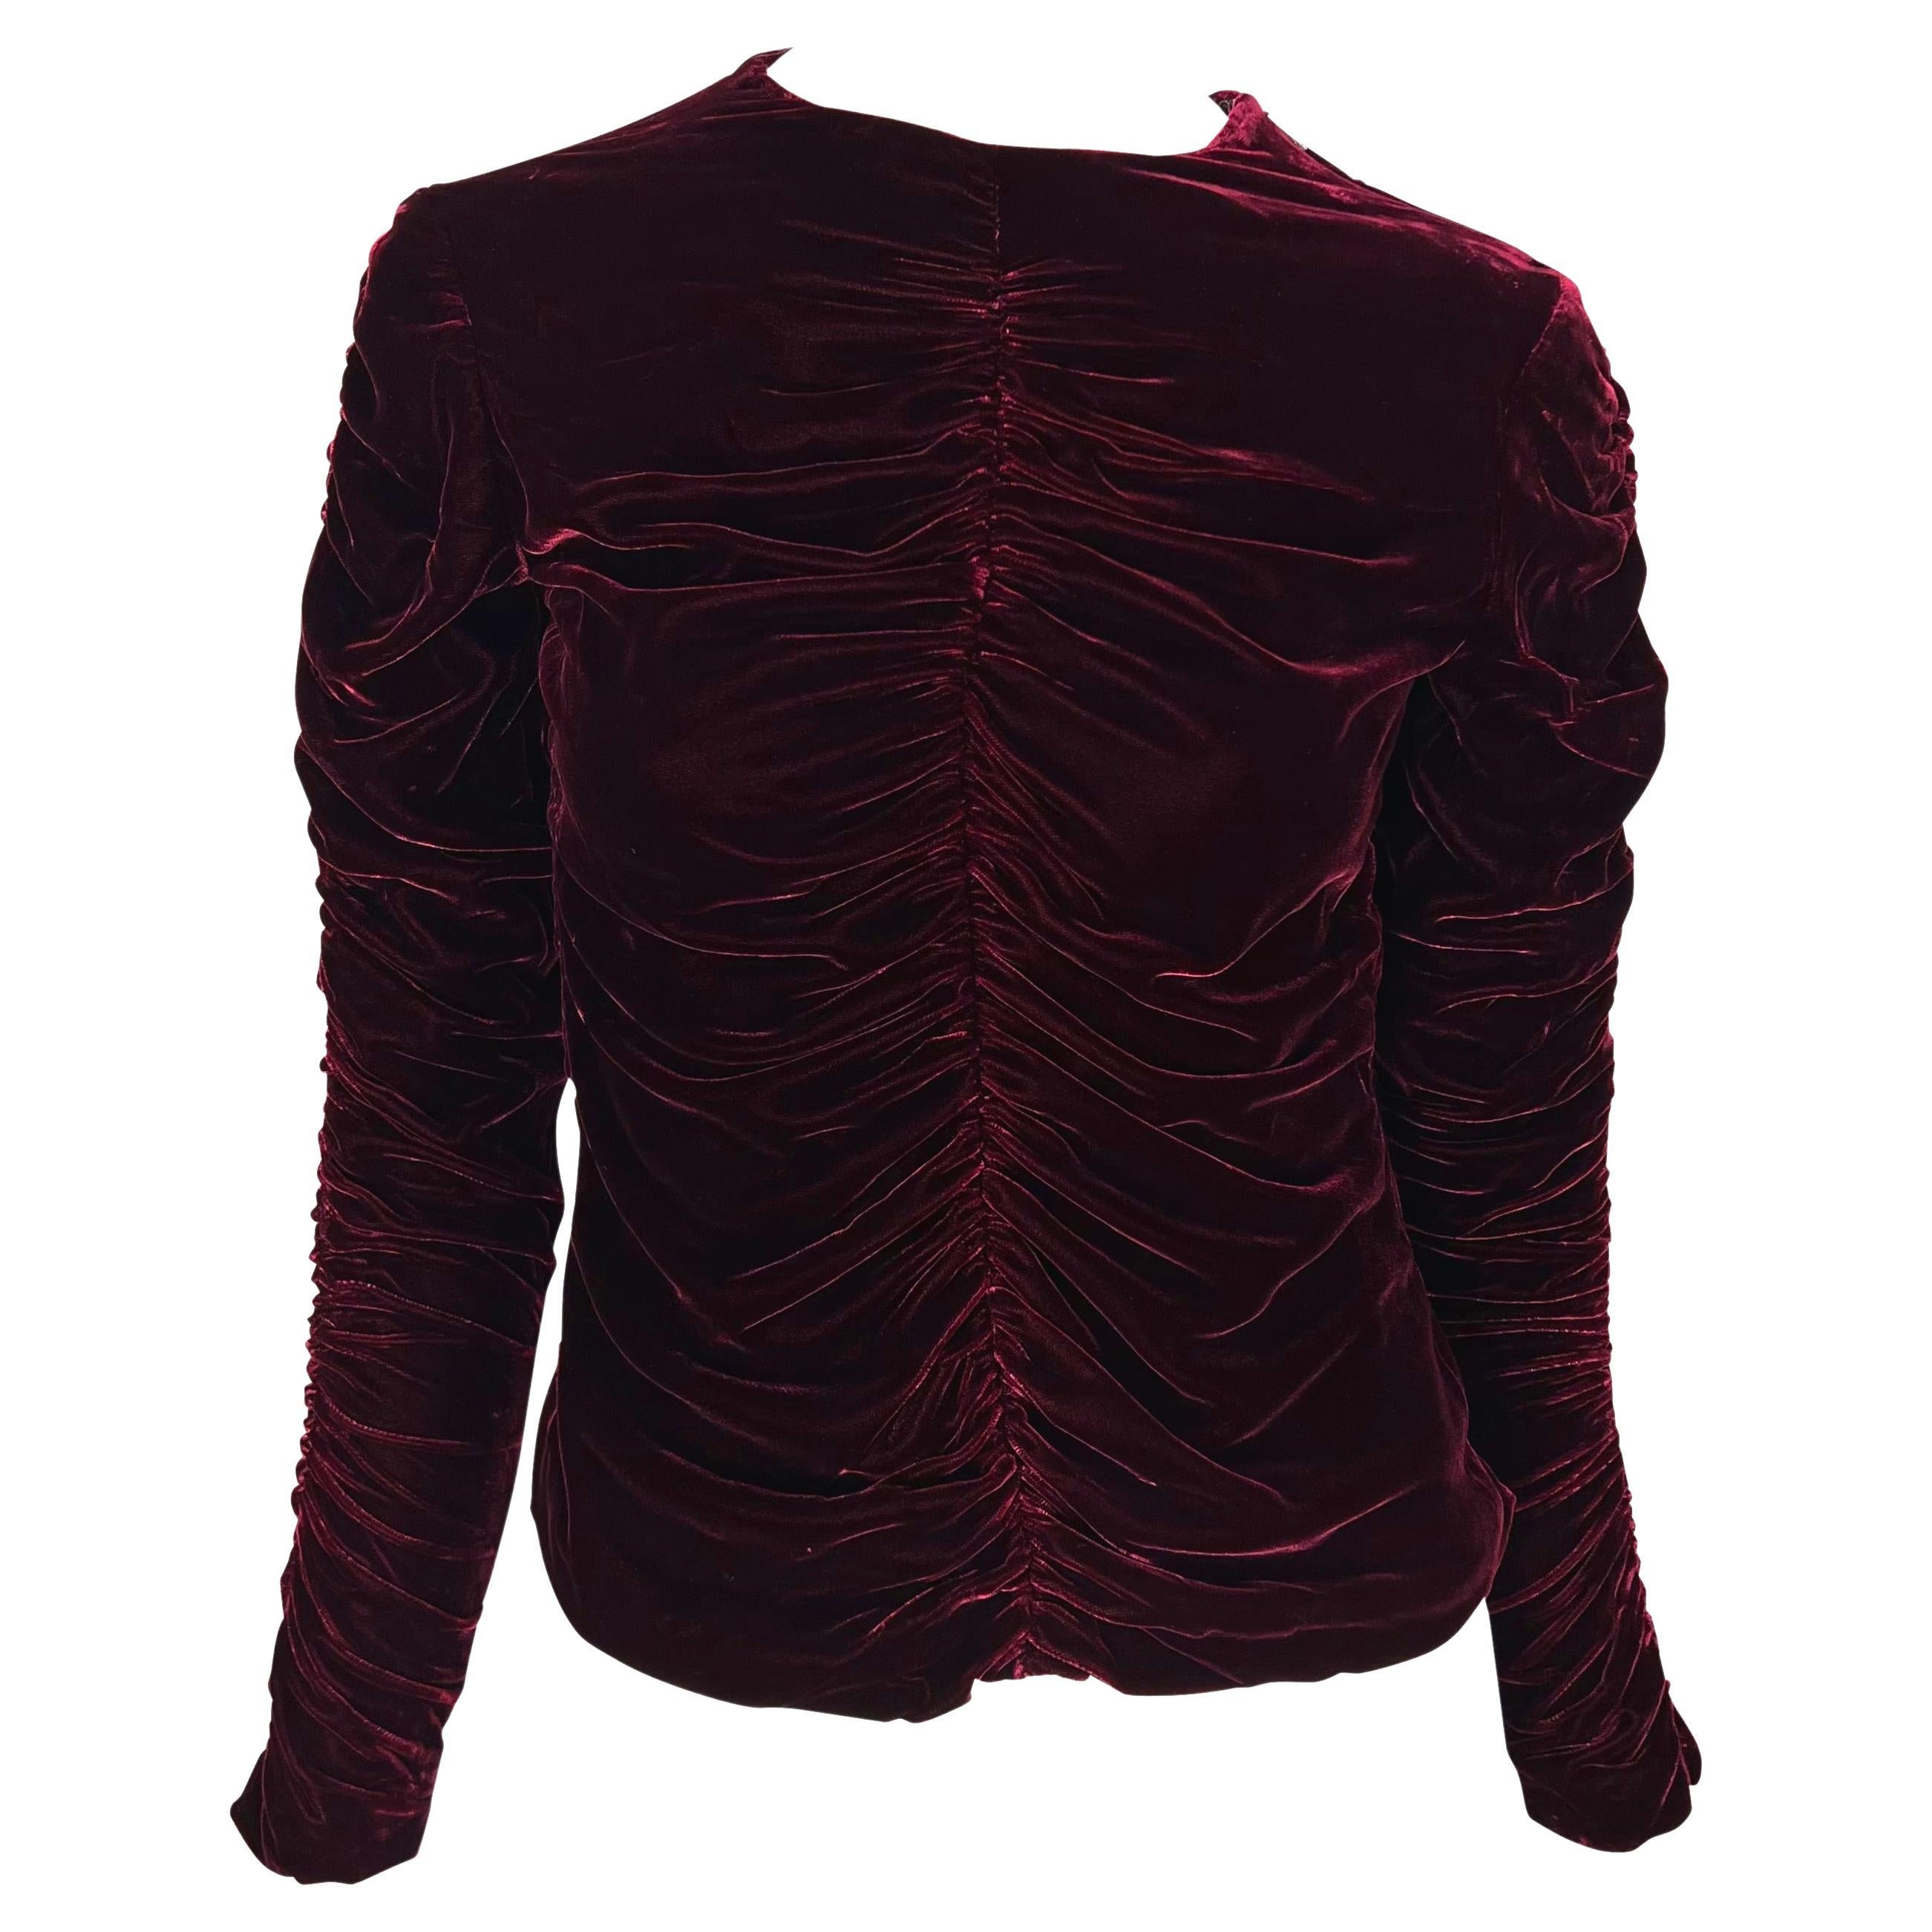 F/W 1999 Gucci by Tom Ford Runway Burgundy Ruched Velvet Blouse For Sale